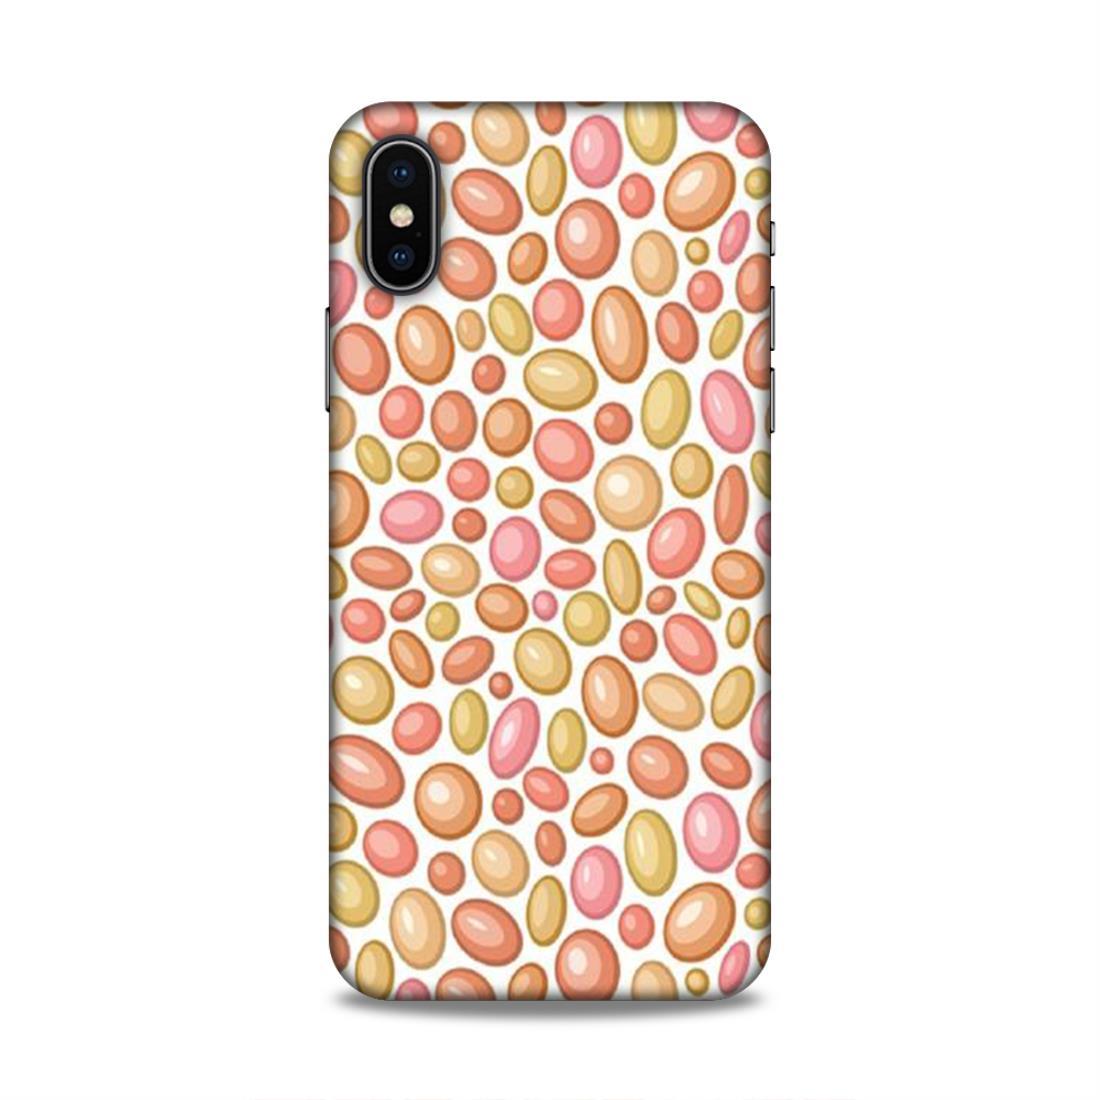 Fancy New Pattern iPhone X Phone Case Cover